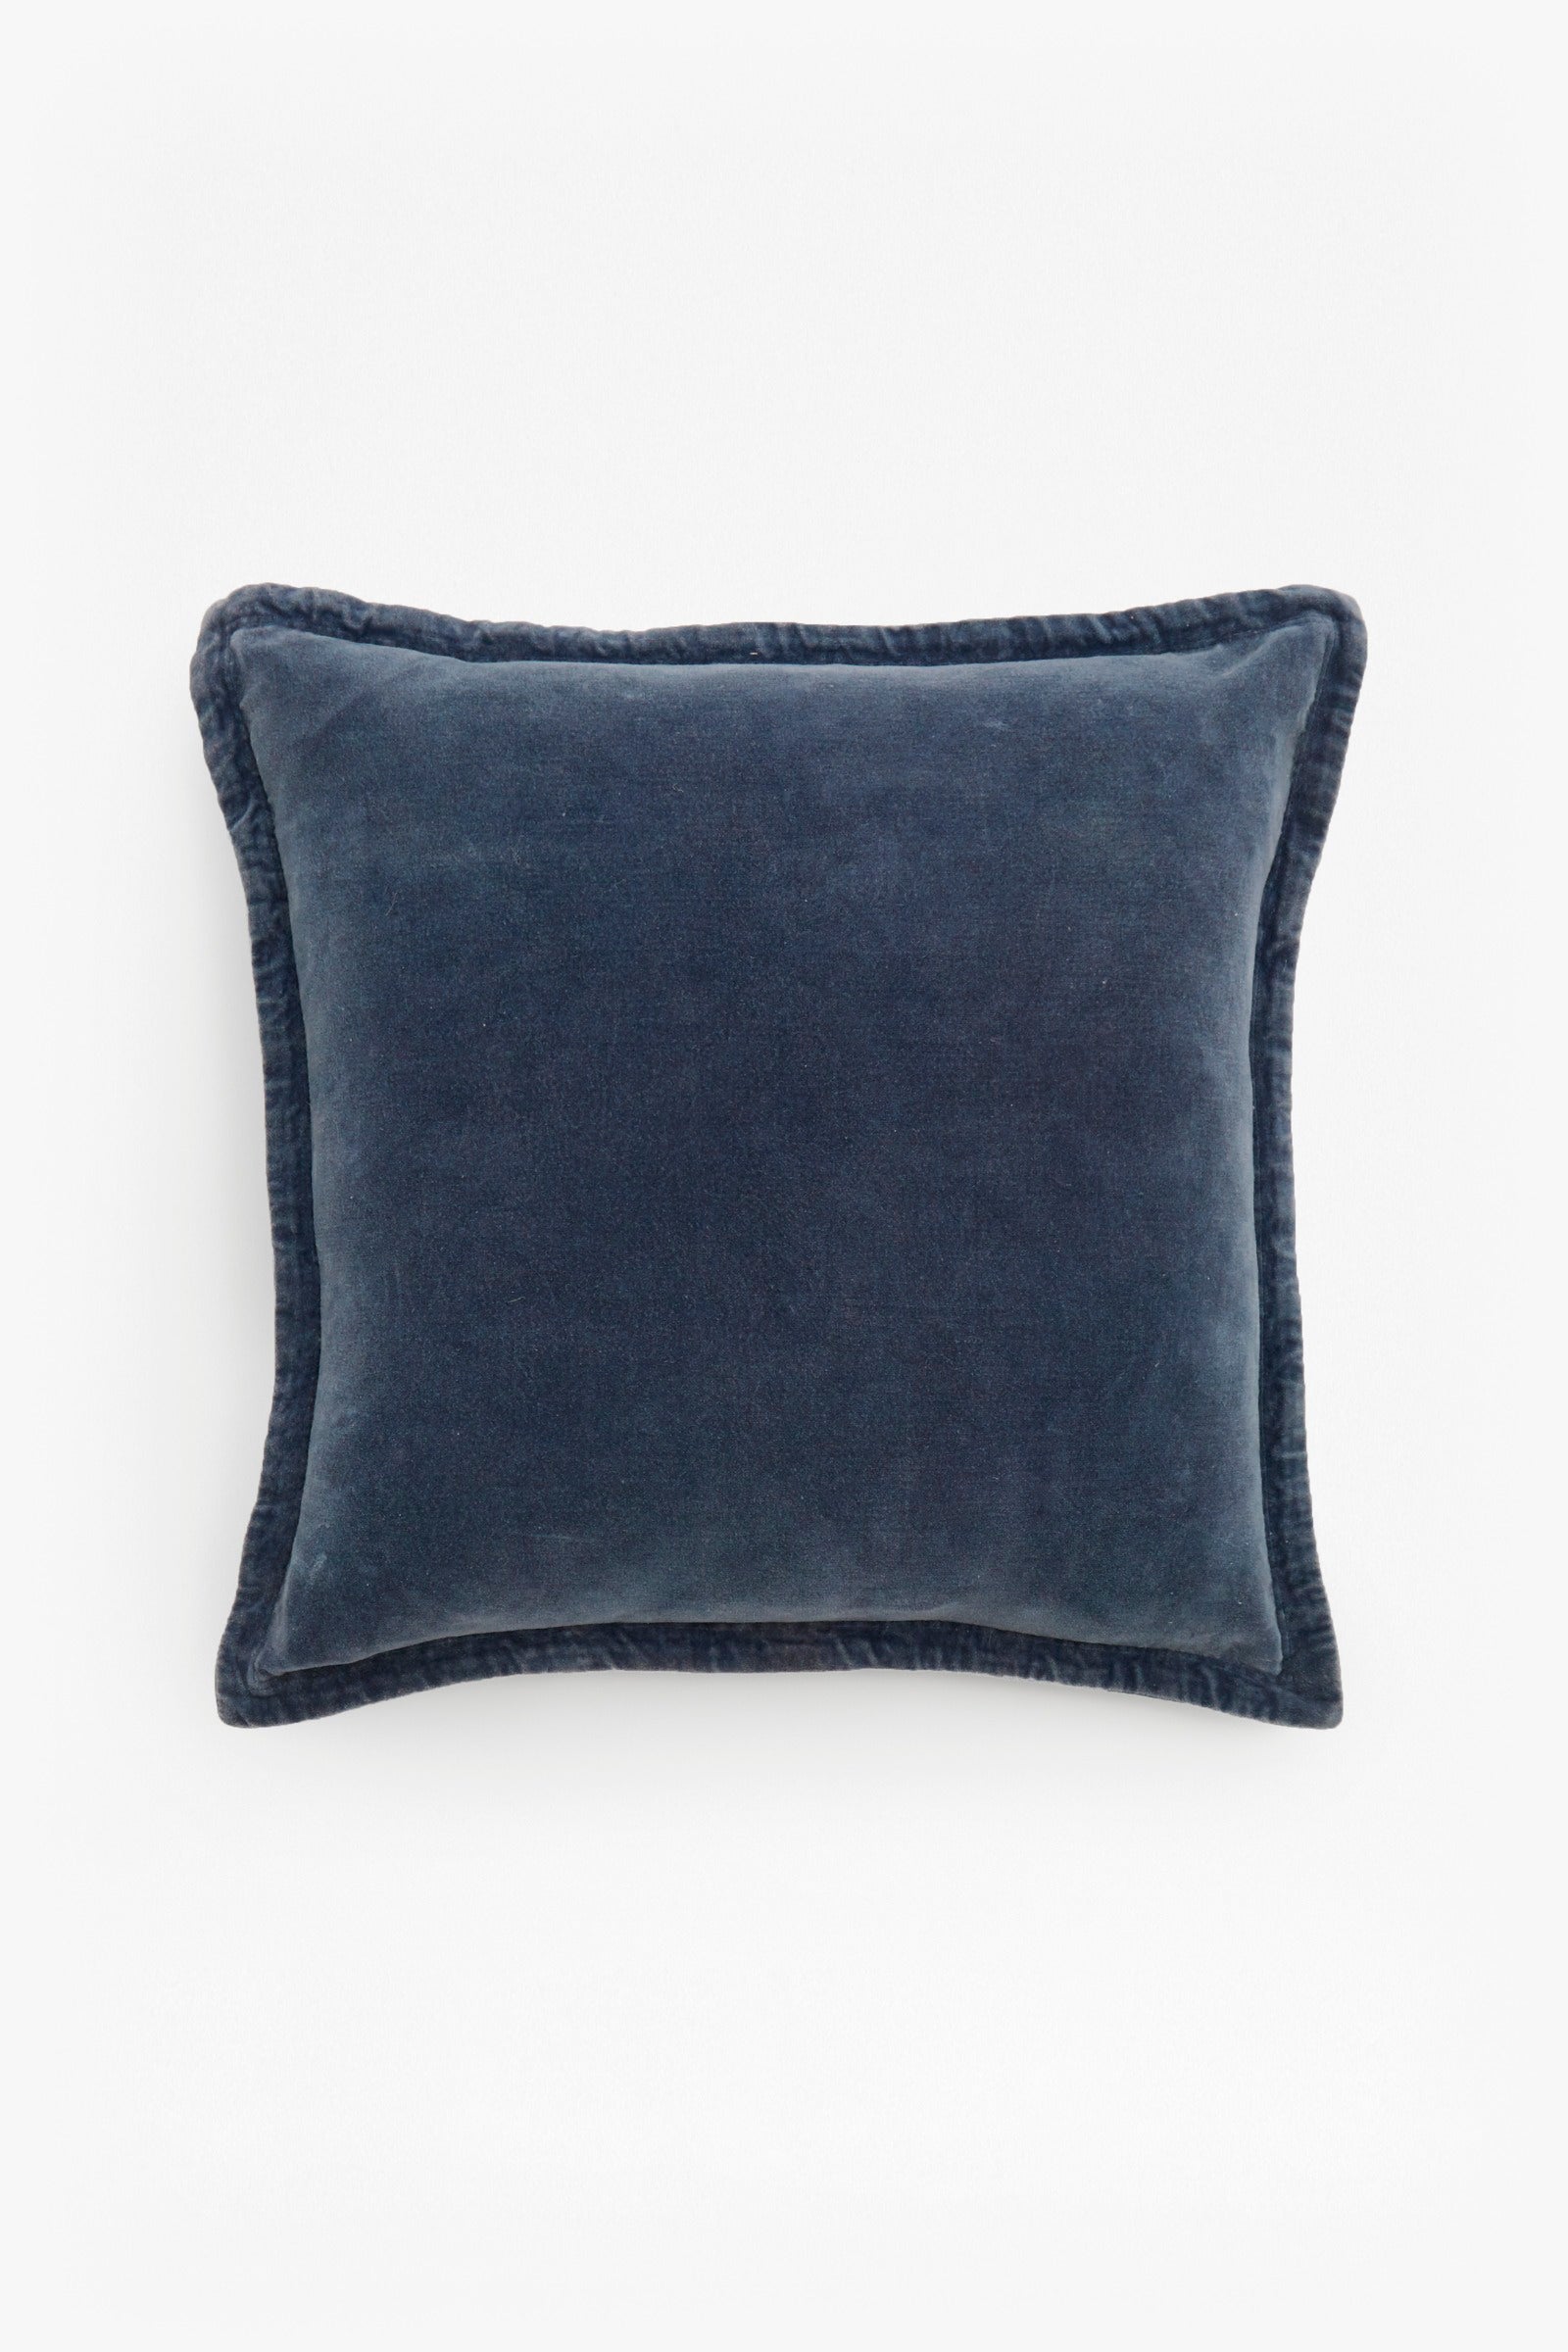 French Connection - Washed Velvet Cushion | French Connection |  Chair & Sofa Cushions | One size - Indigo - Size: OS